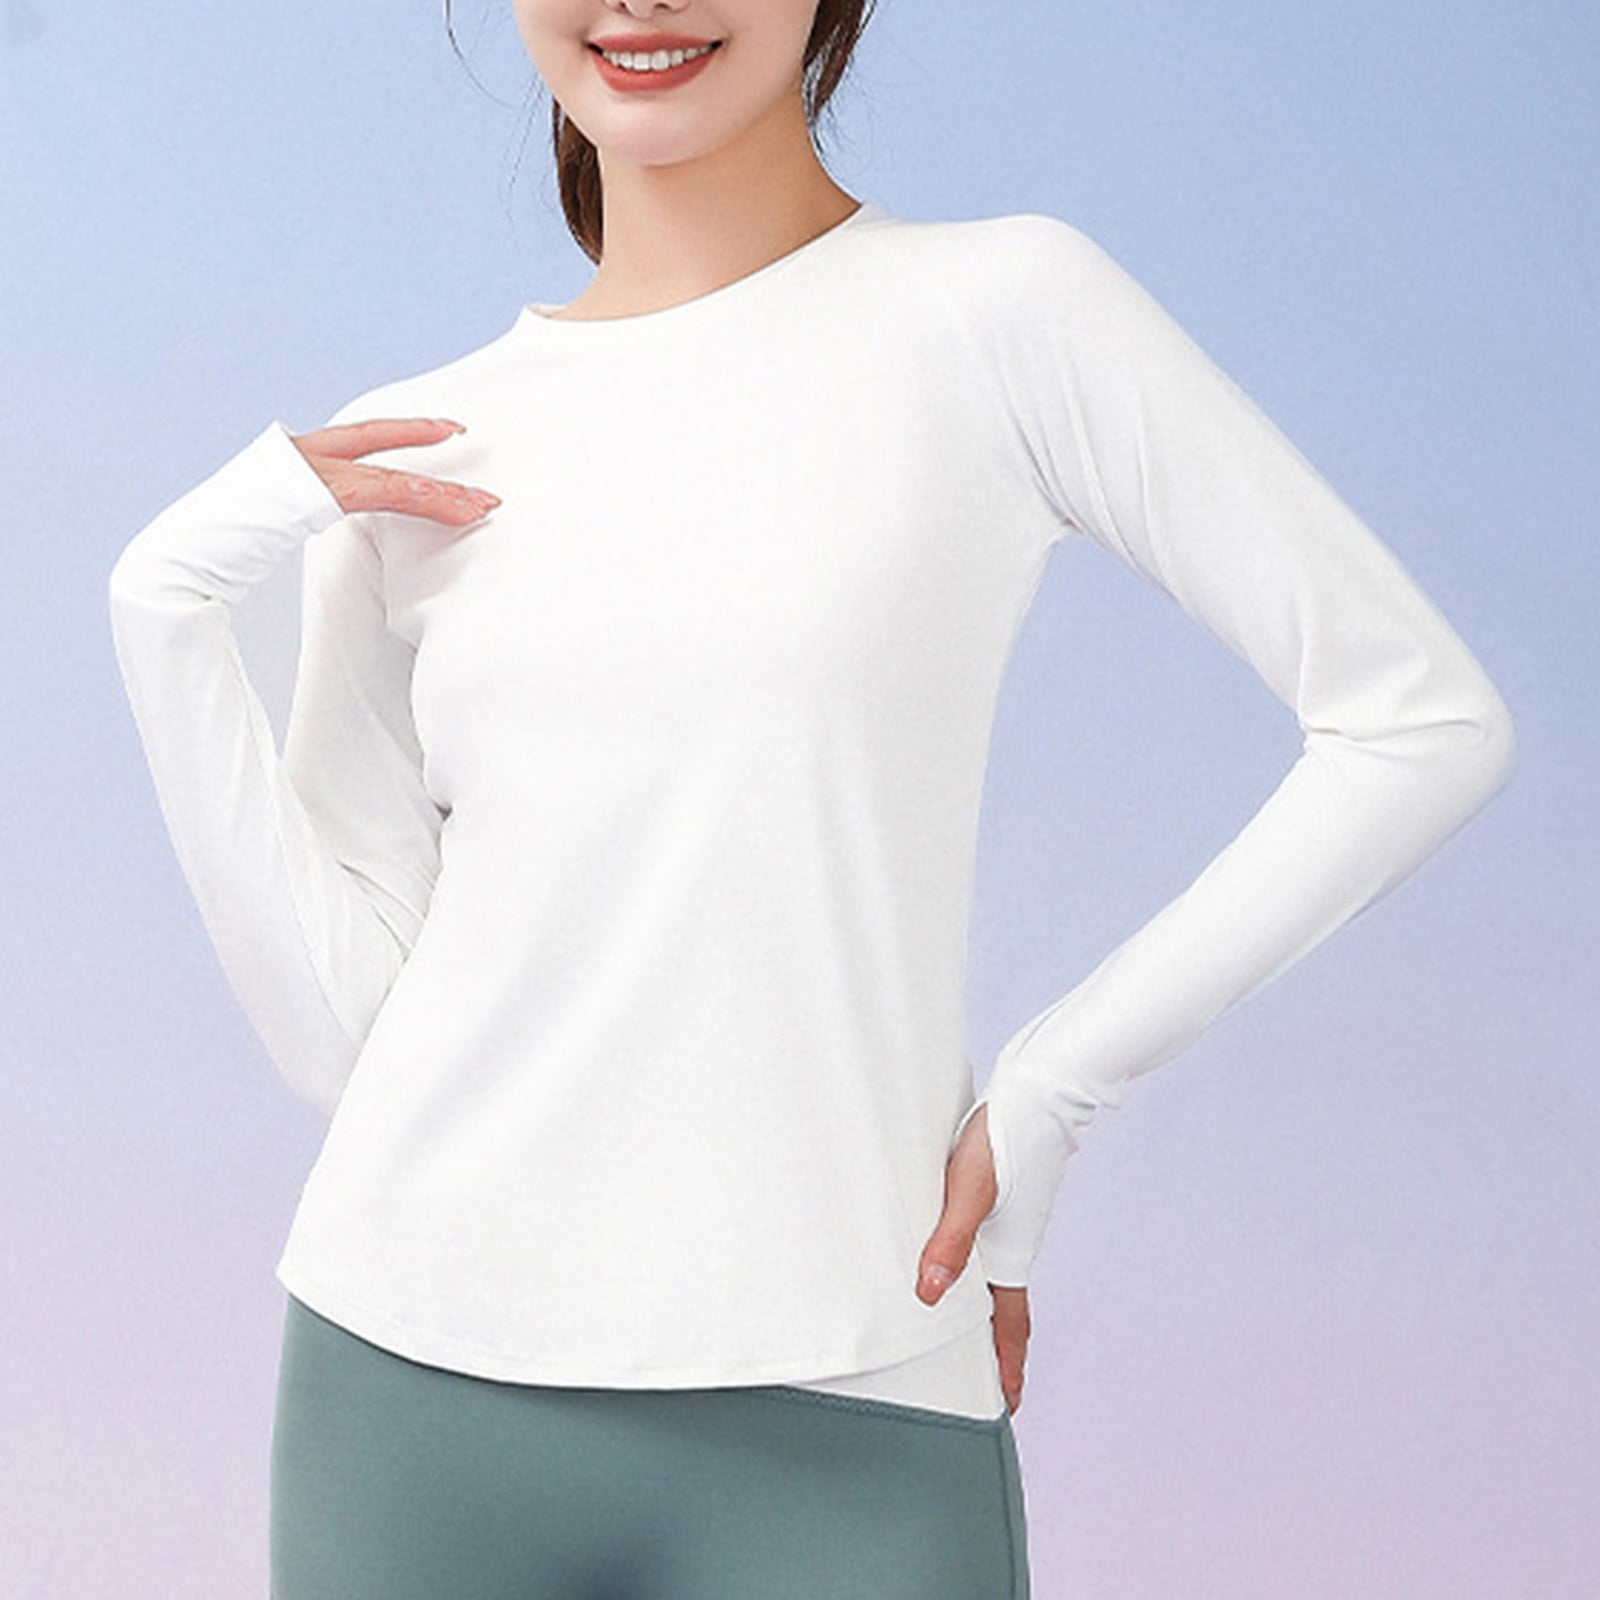 Compression Shirts for Women Backless Tops Yoga Workout Shirts